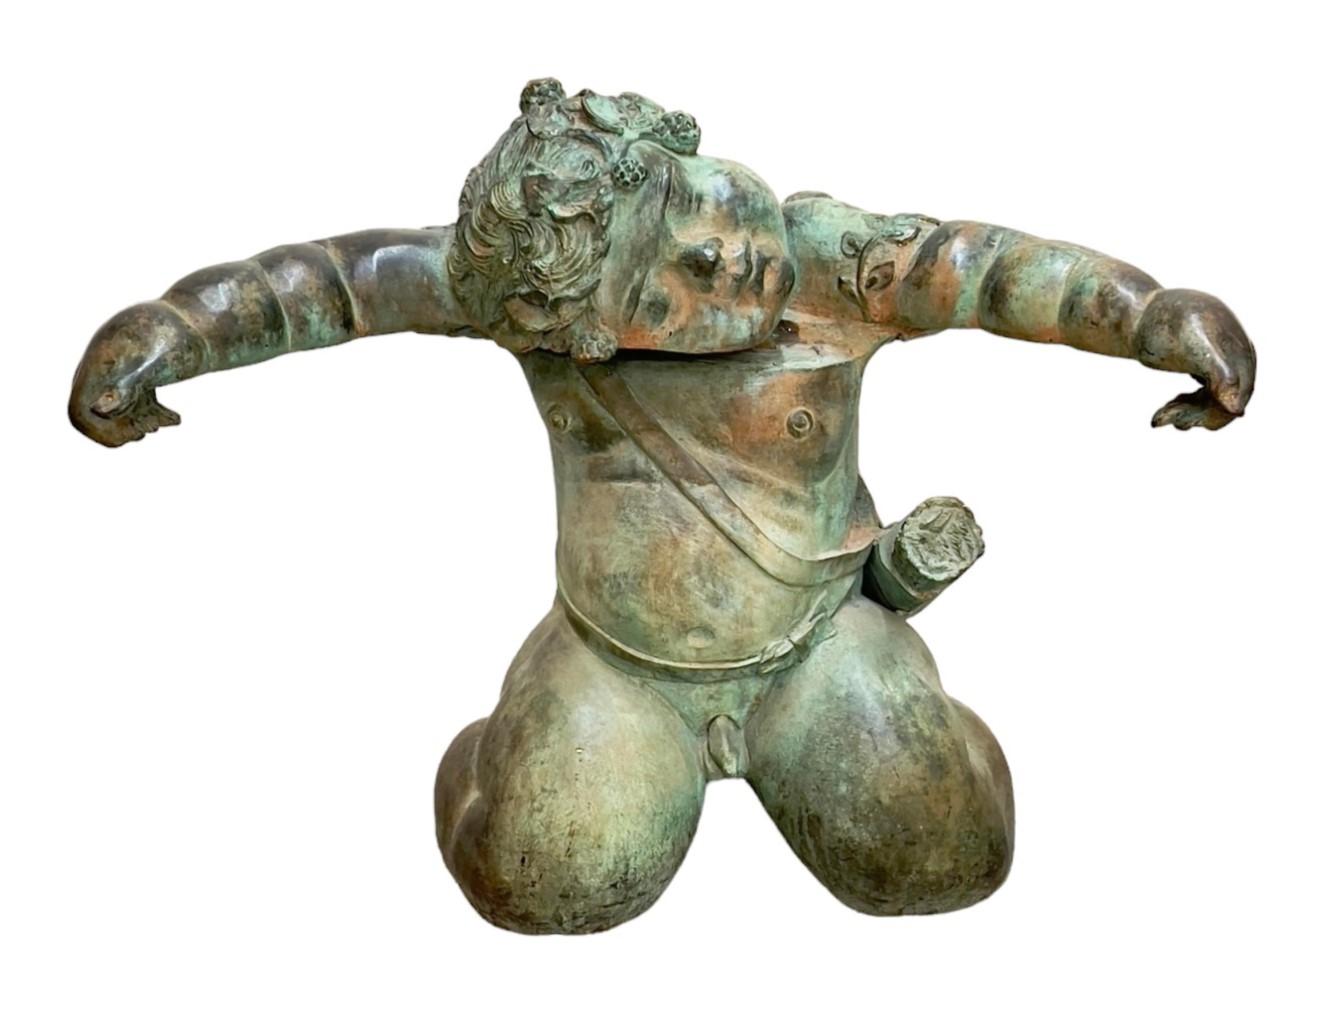 Italian mid century bronze cherub holding an piece of glass forming a coffee table. Each cherub is on its knees and extending their arms outward to hold the glass piece that makes the table top portion of this coffee table. There is wonderful patina